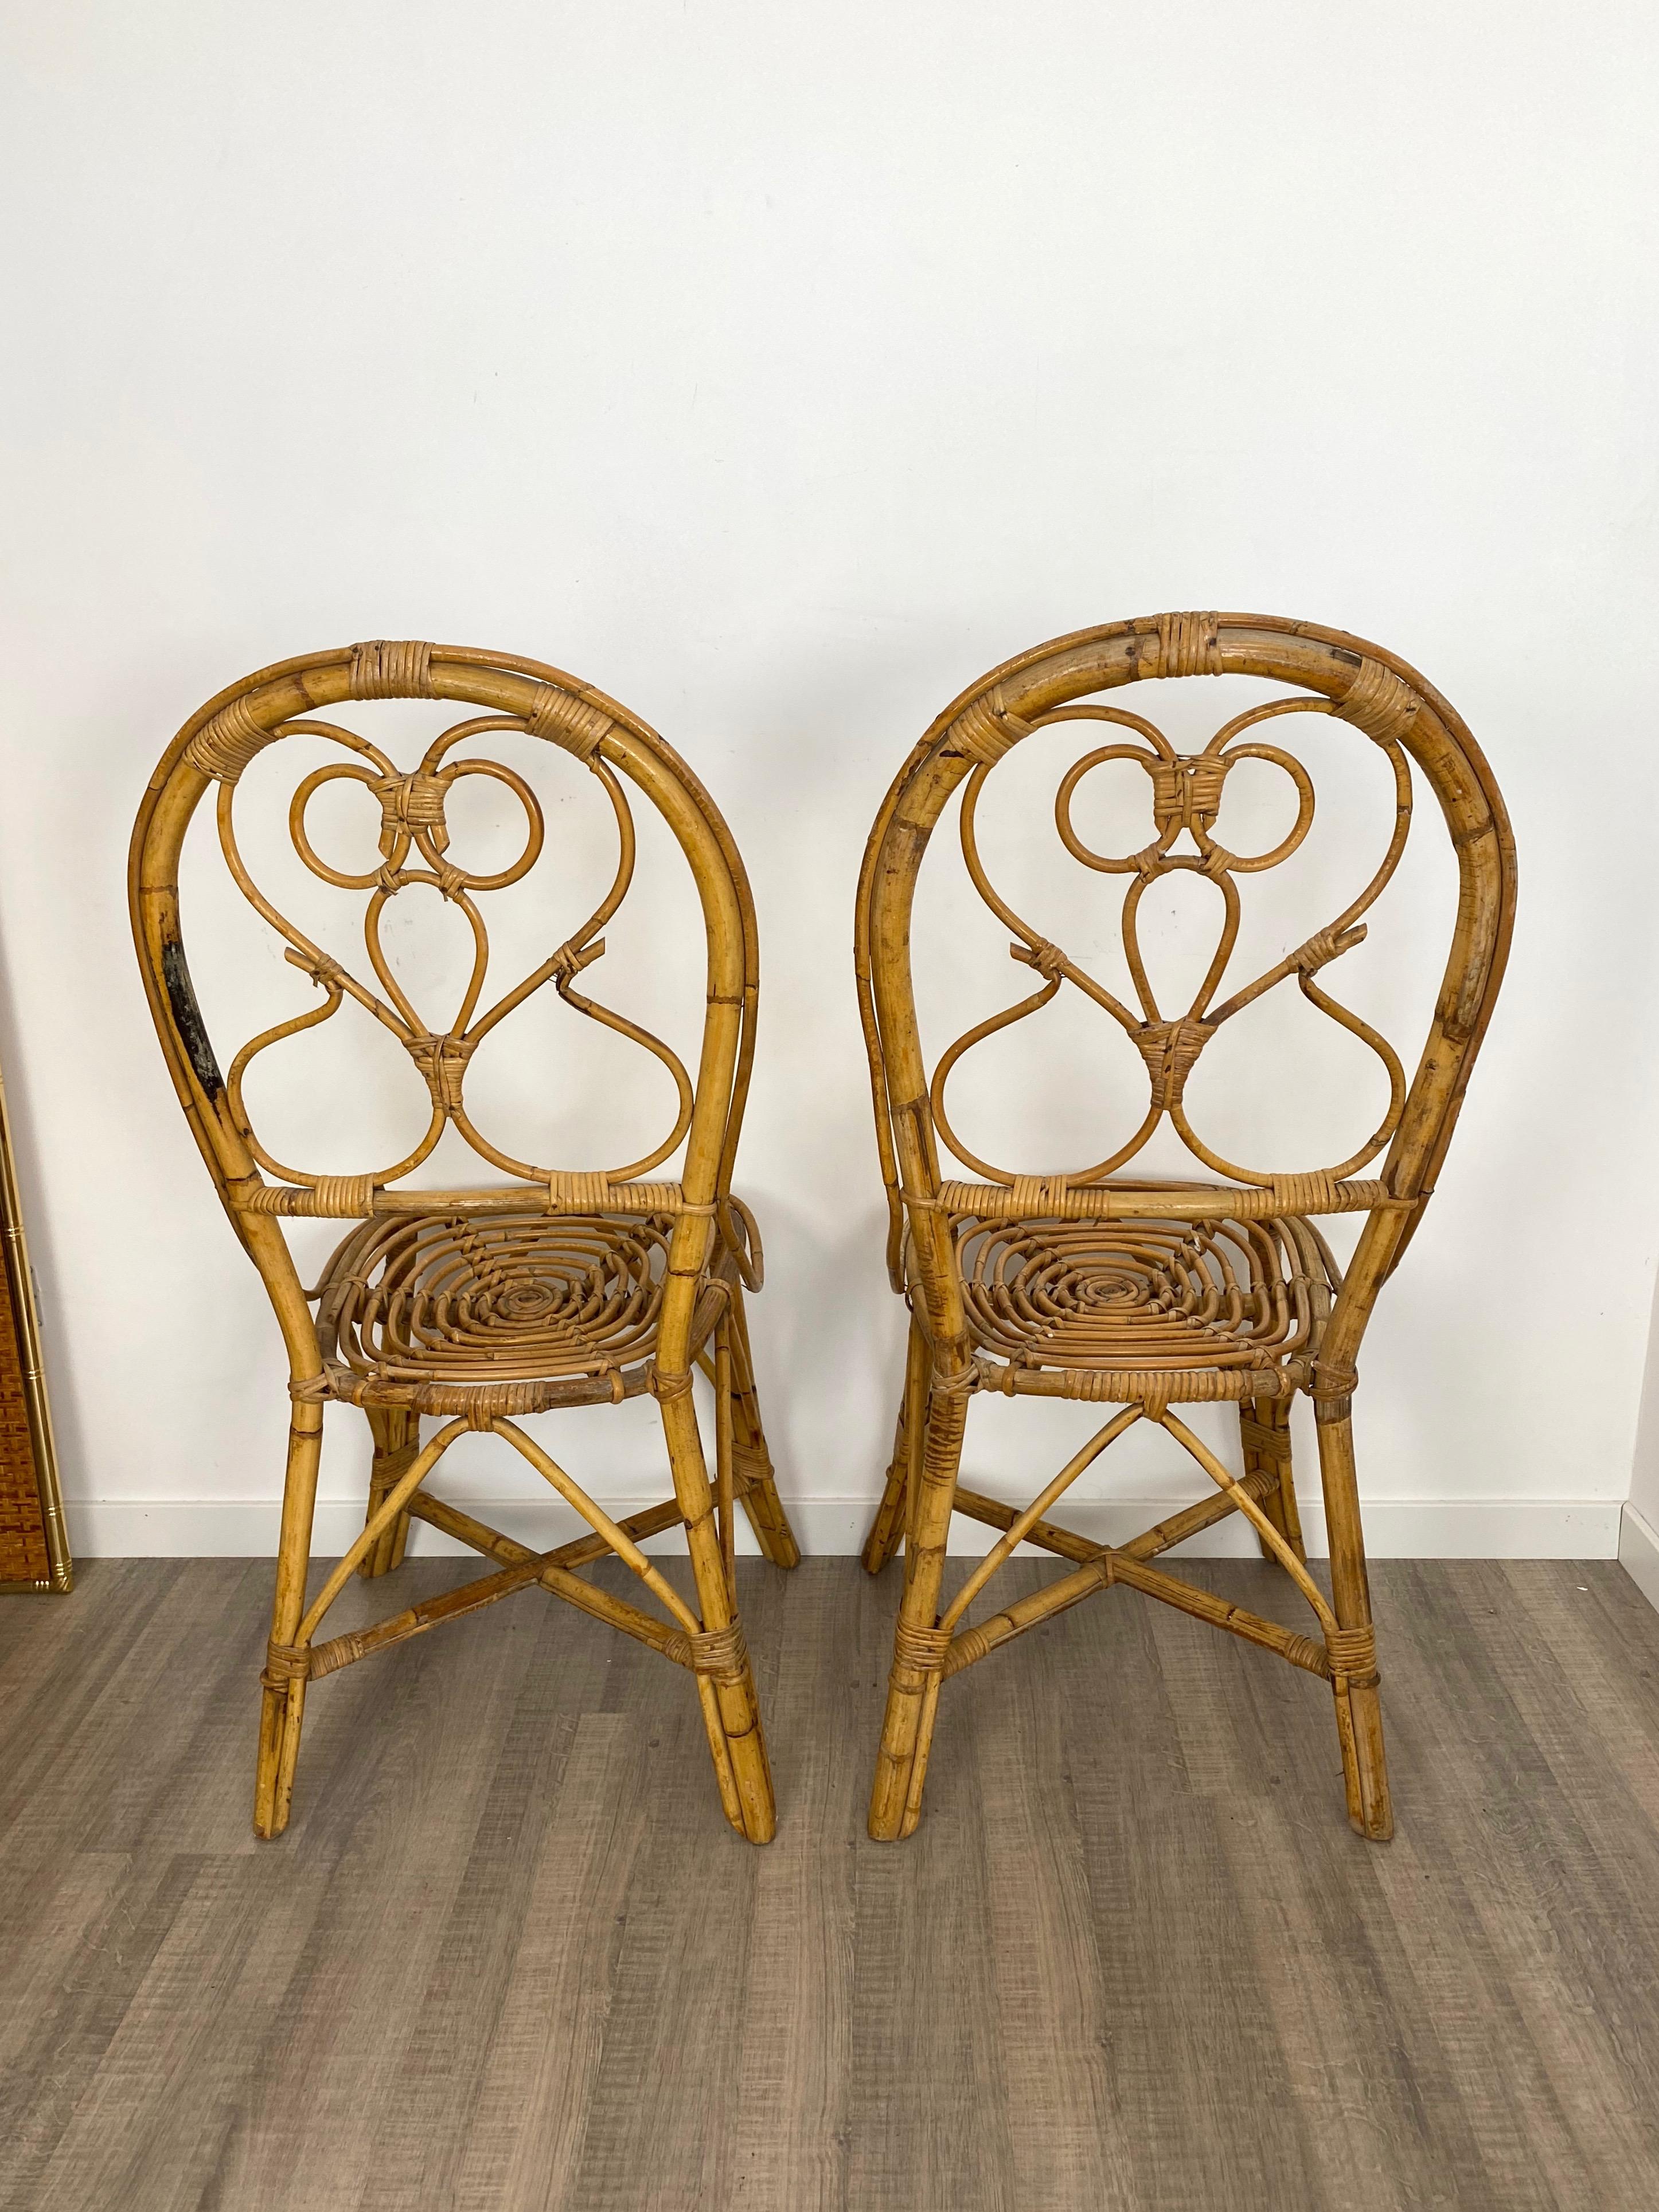 Six Chairs Rattan and Bamboo, Italy, 1960s For Sale 6